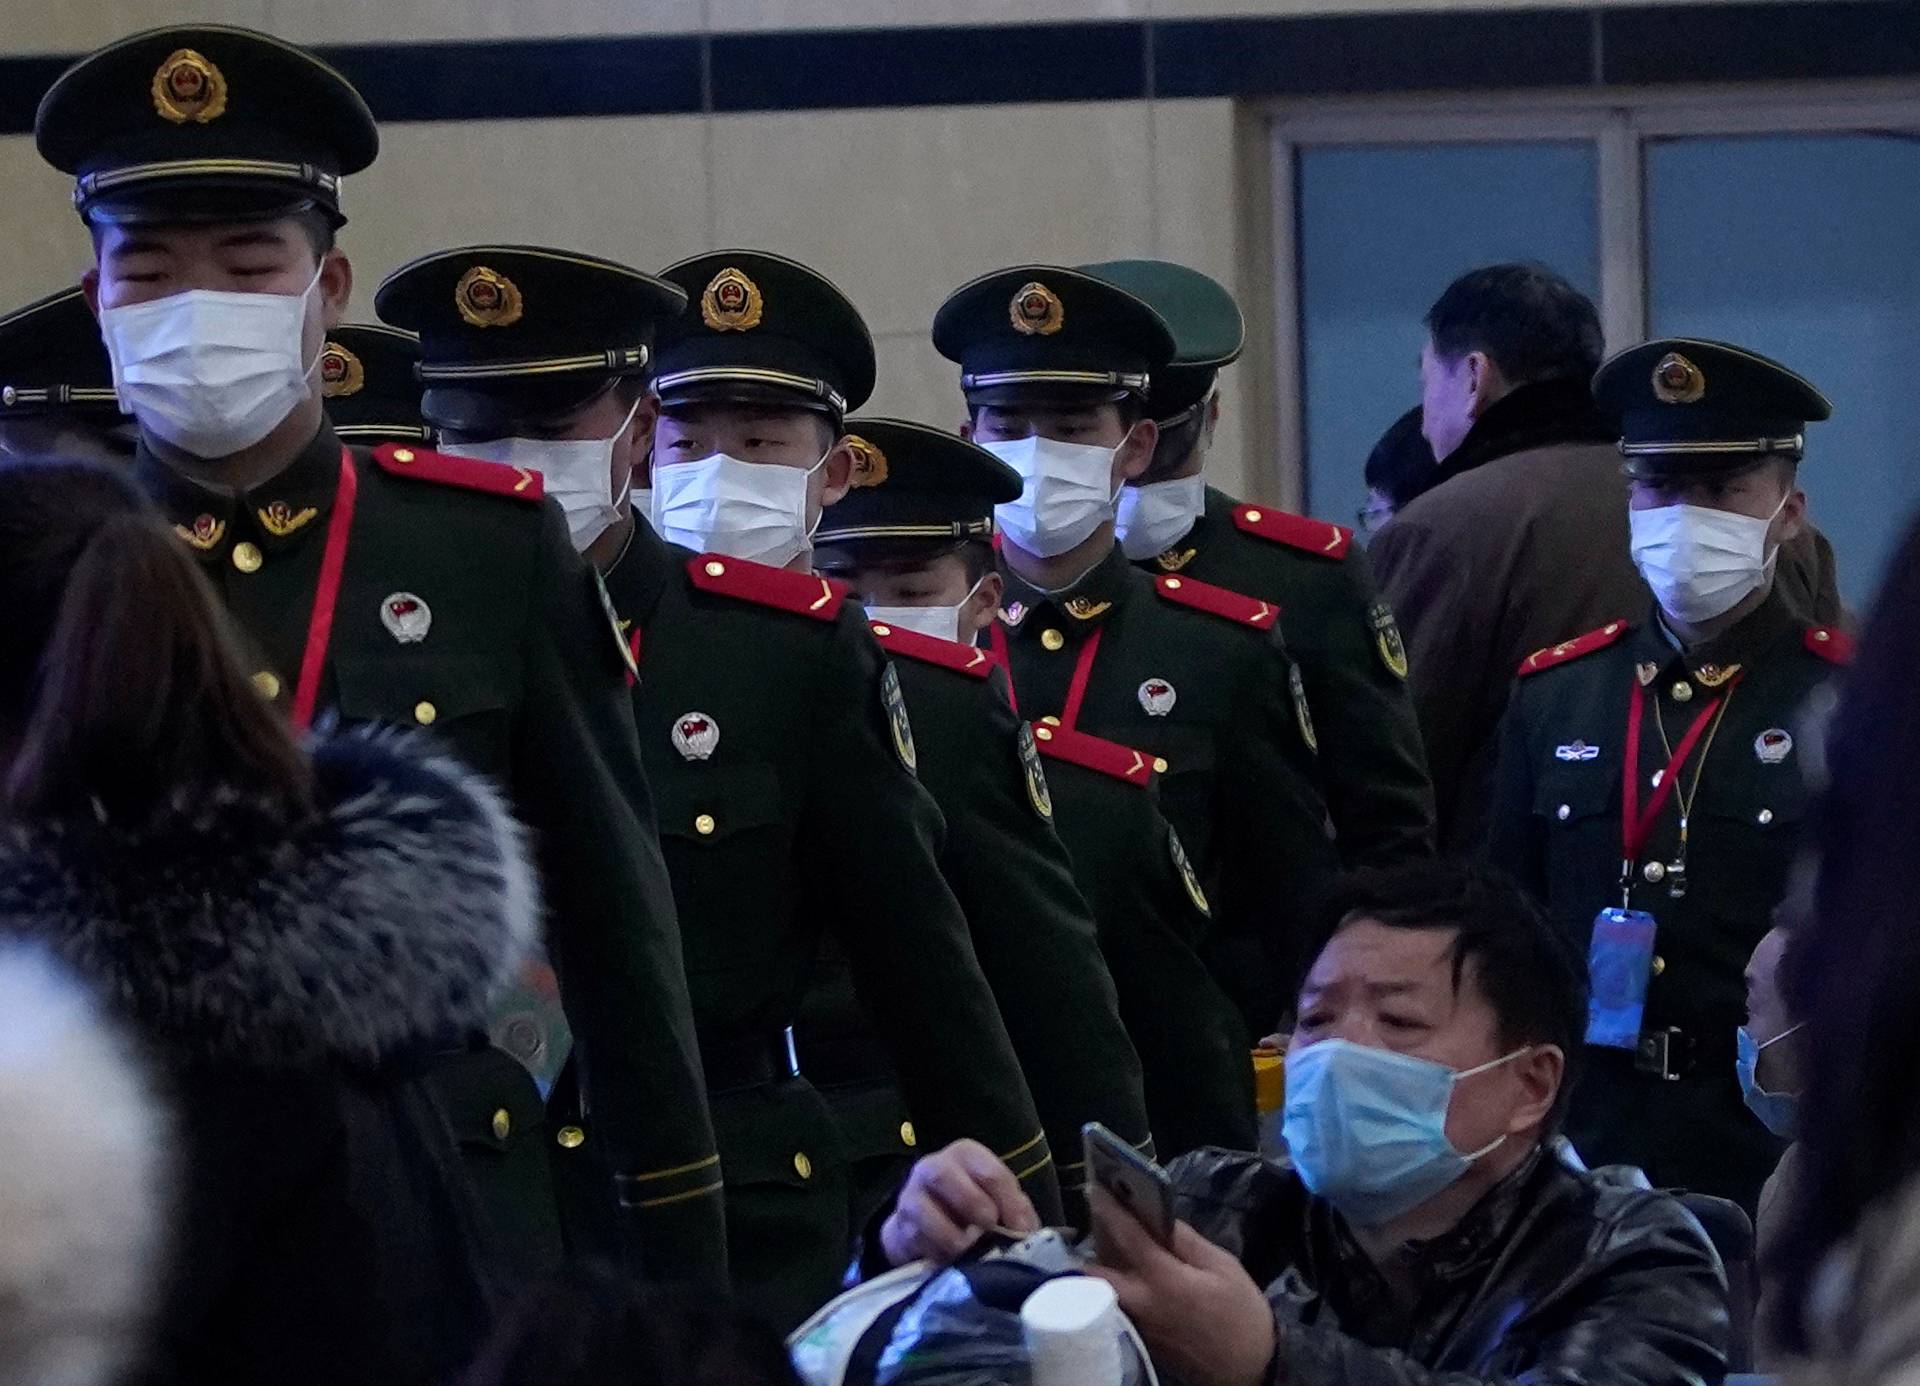 Paramilitary police officers wearing masks are seen at Shanghai railway station in Shanghai